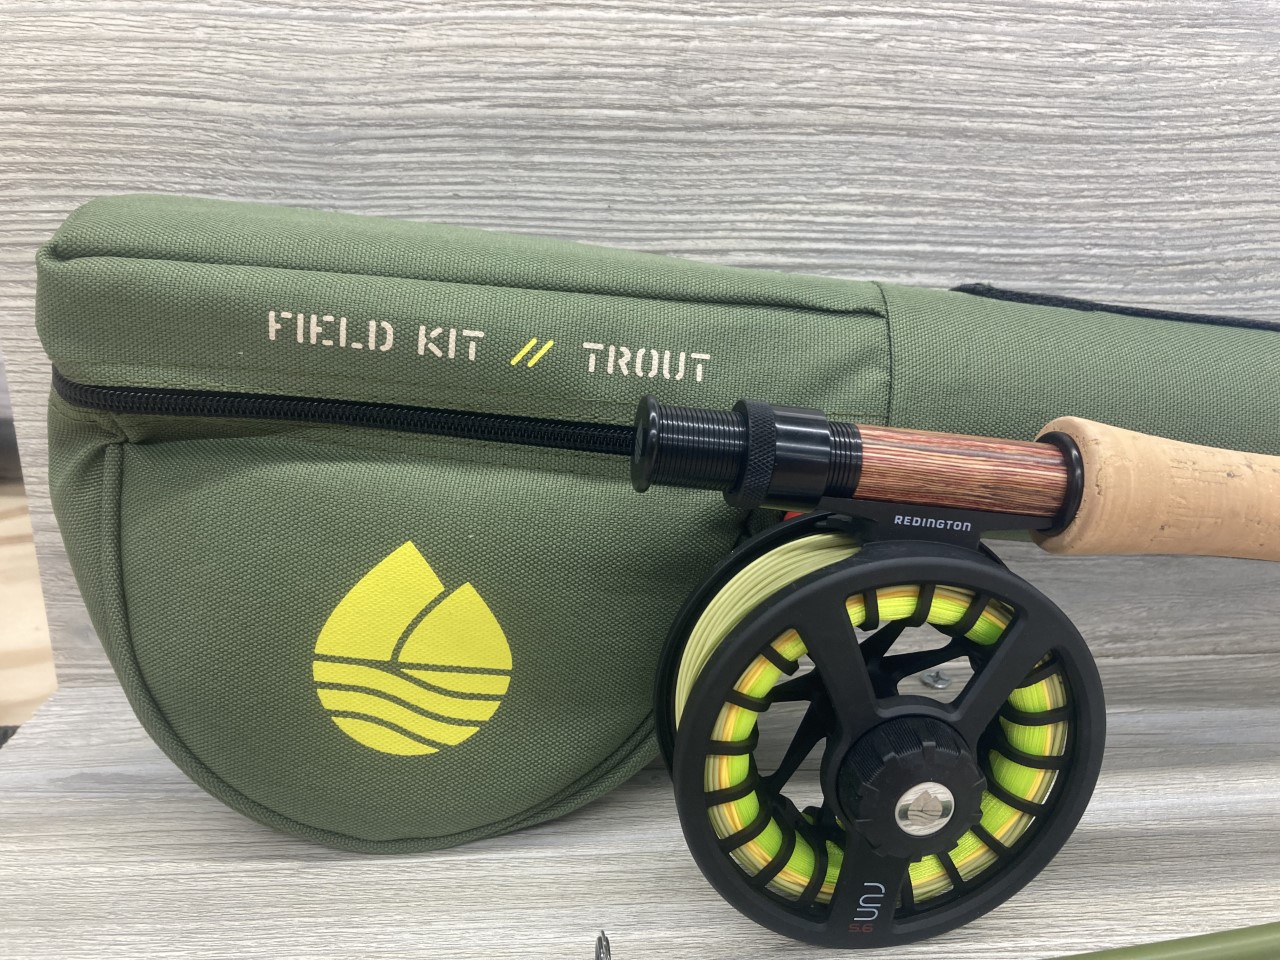 Redington Trout Field Kit Rod and Reel set in front of the protective case